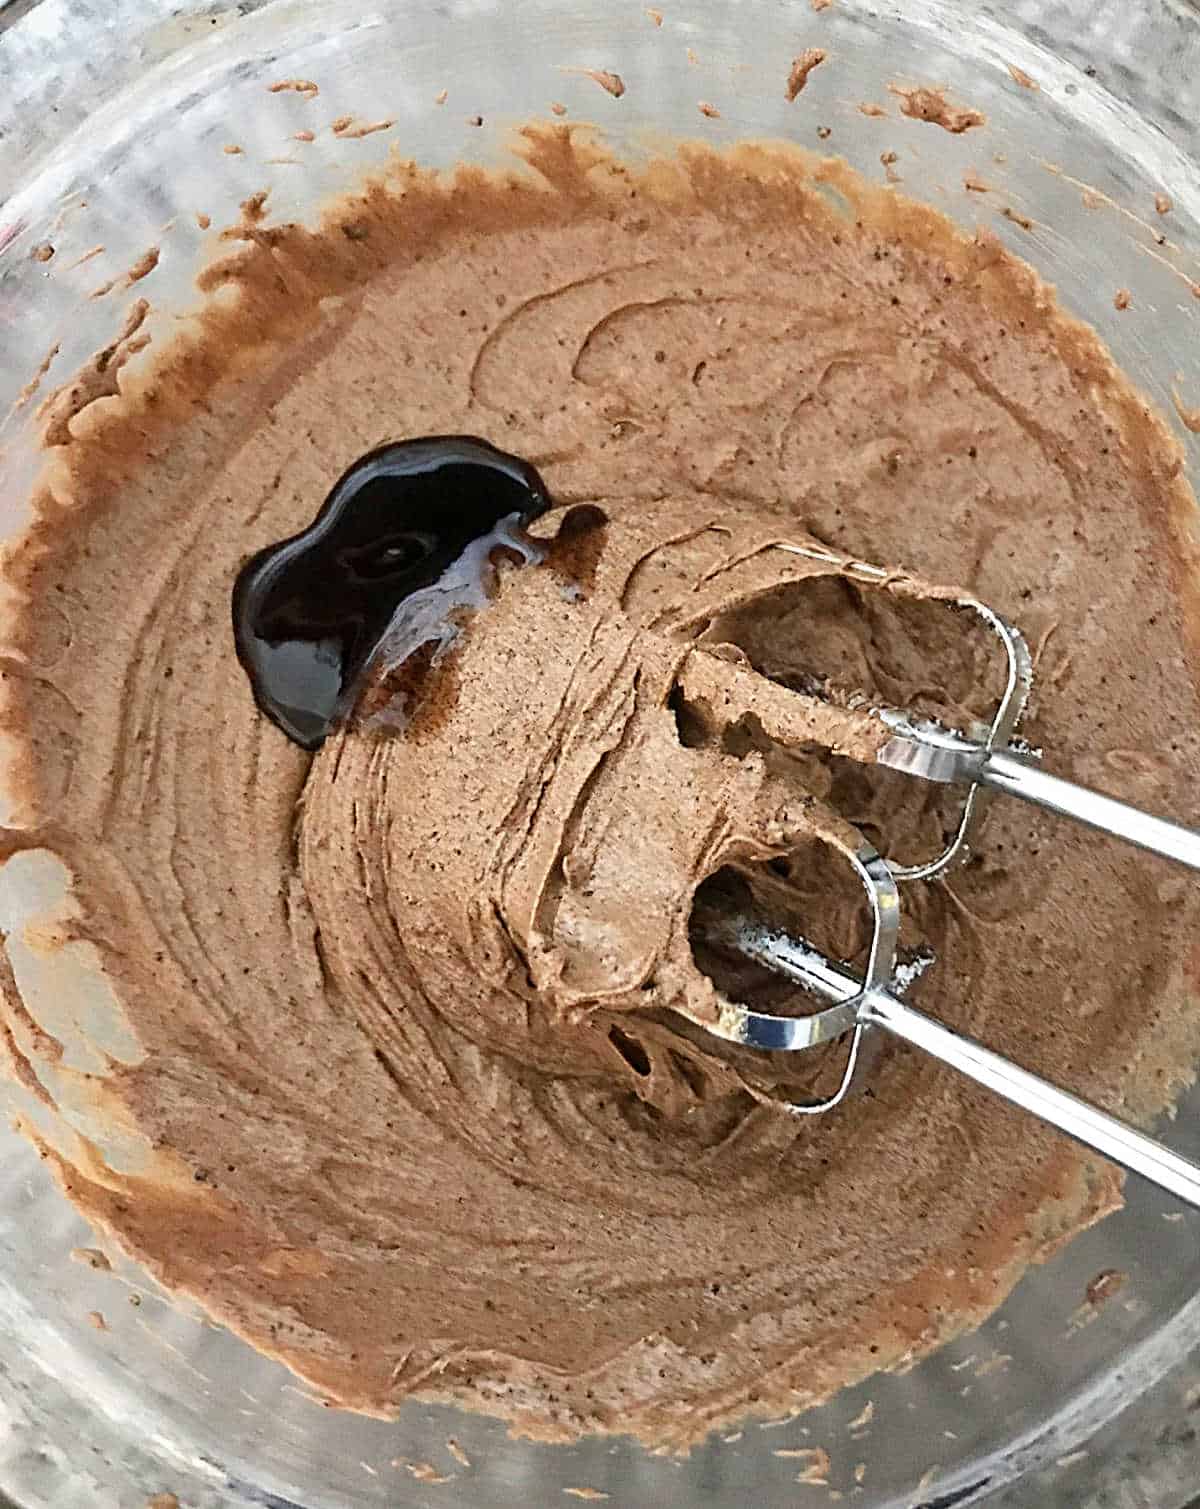 Top view of chocolate batter in bowl with metal beaters